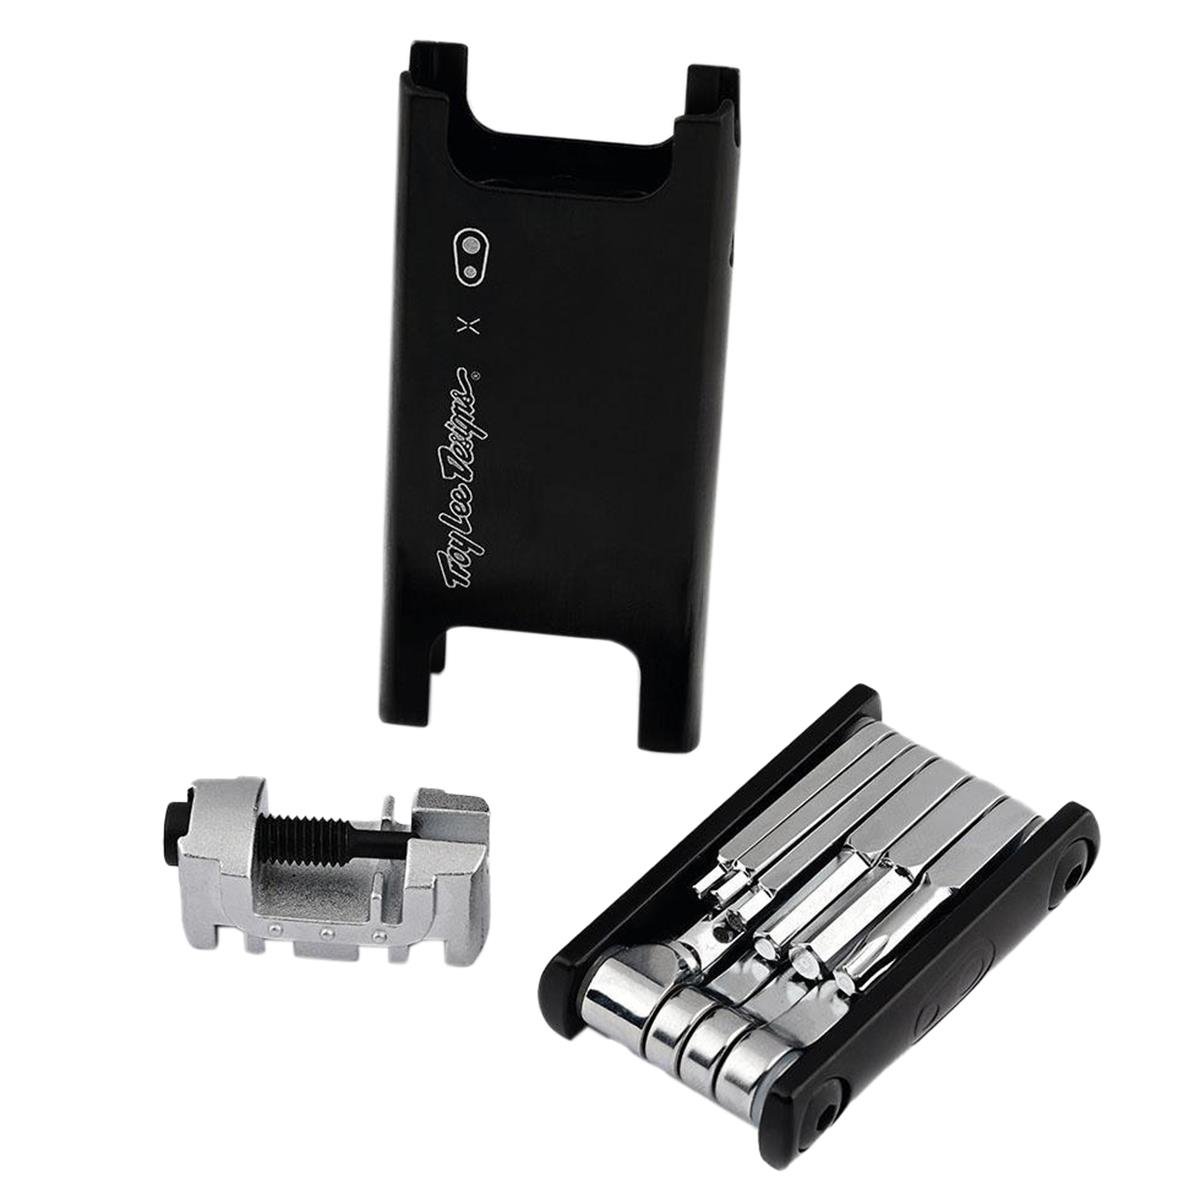 Crankbrothers Multitool F15 Limited Edition - Black/Silver